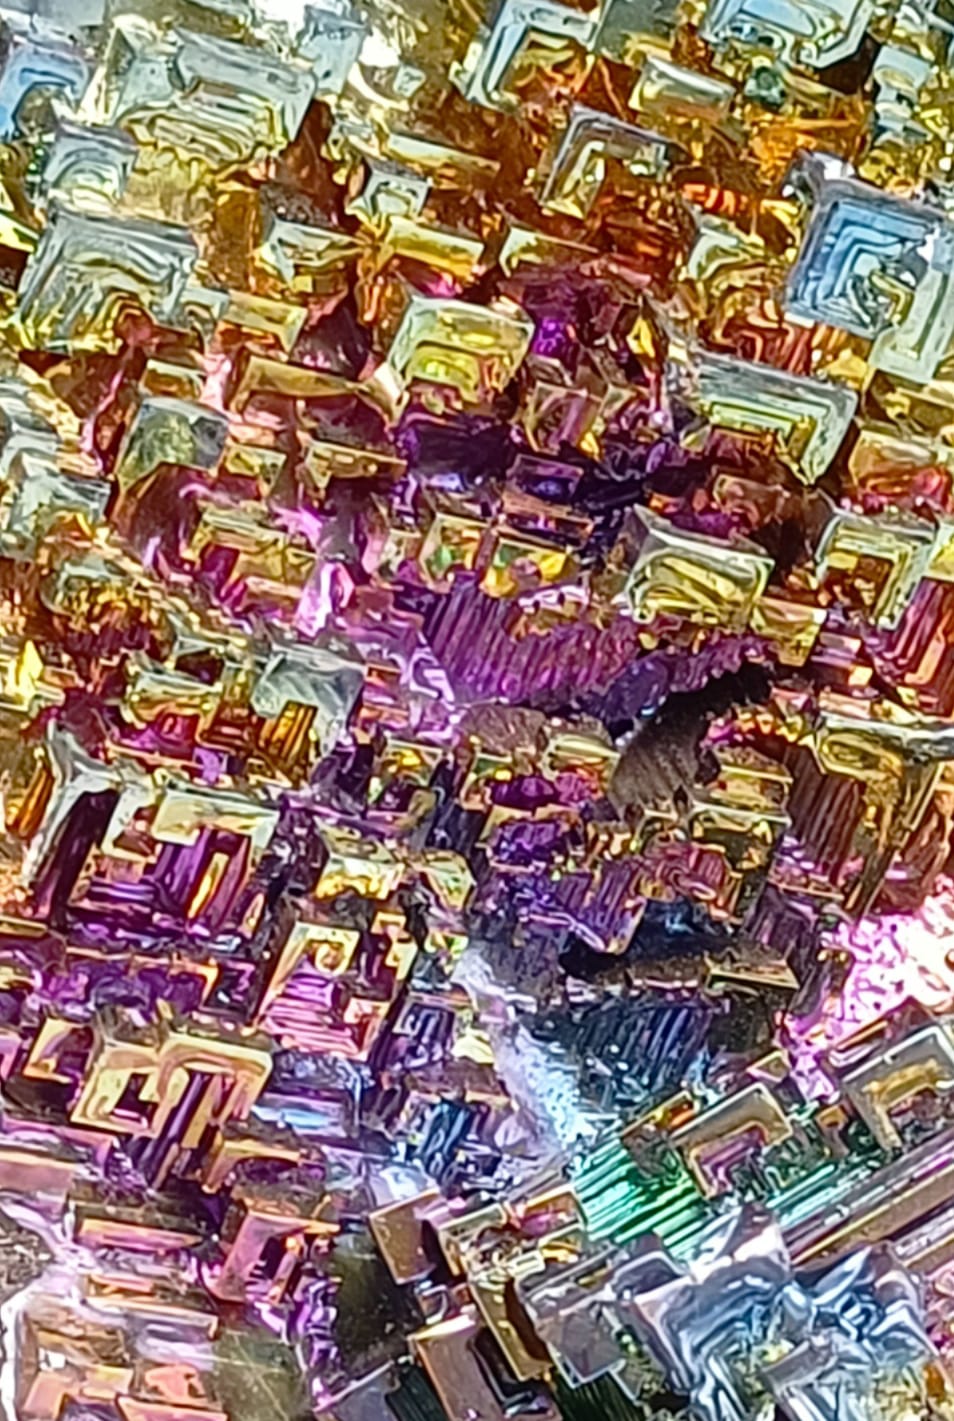 Bismuth Extra Large 14x9.5x4cm Crystal Wellness